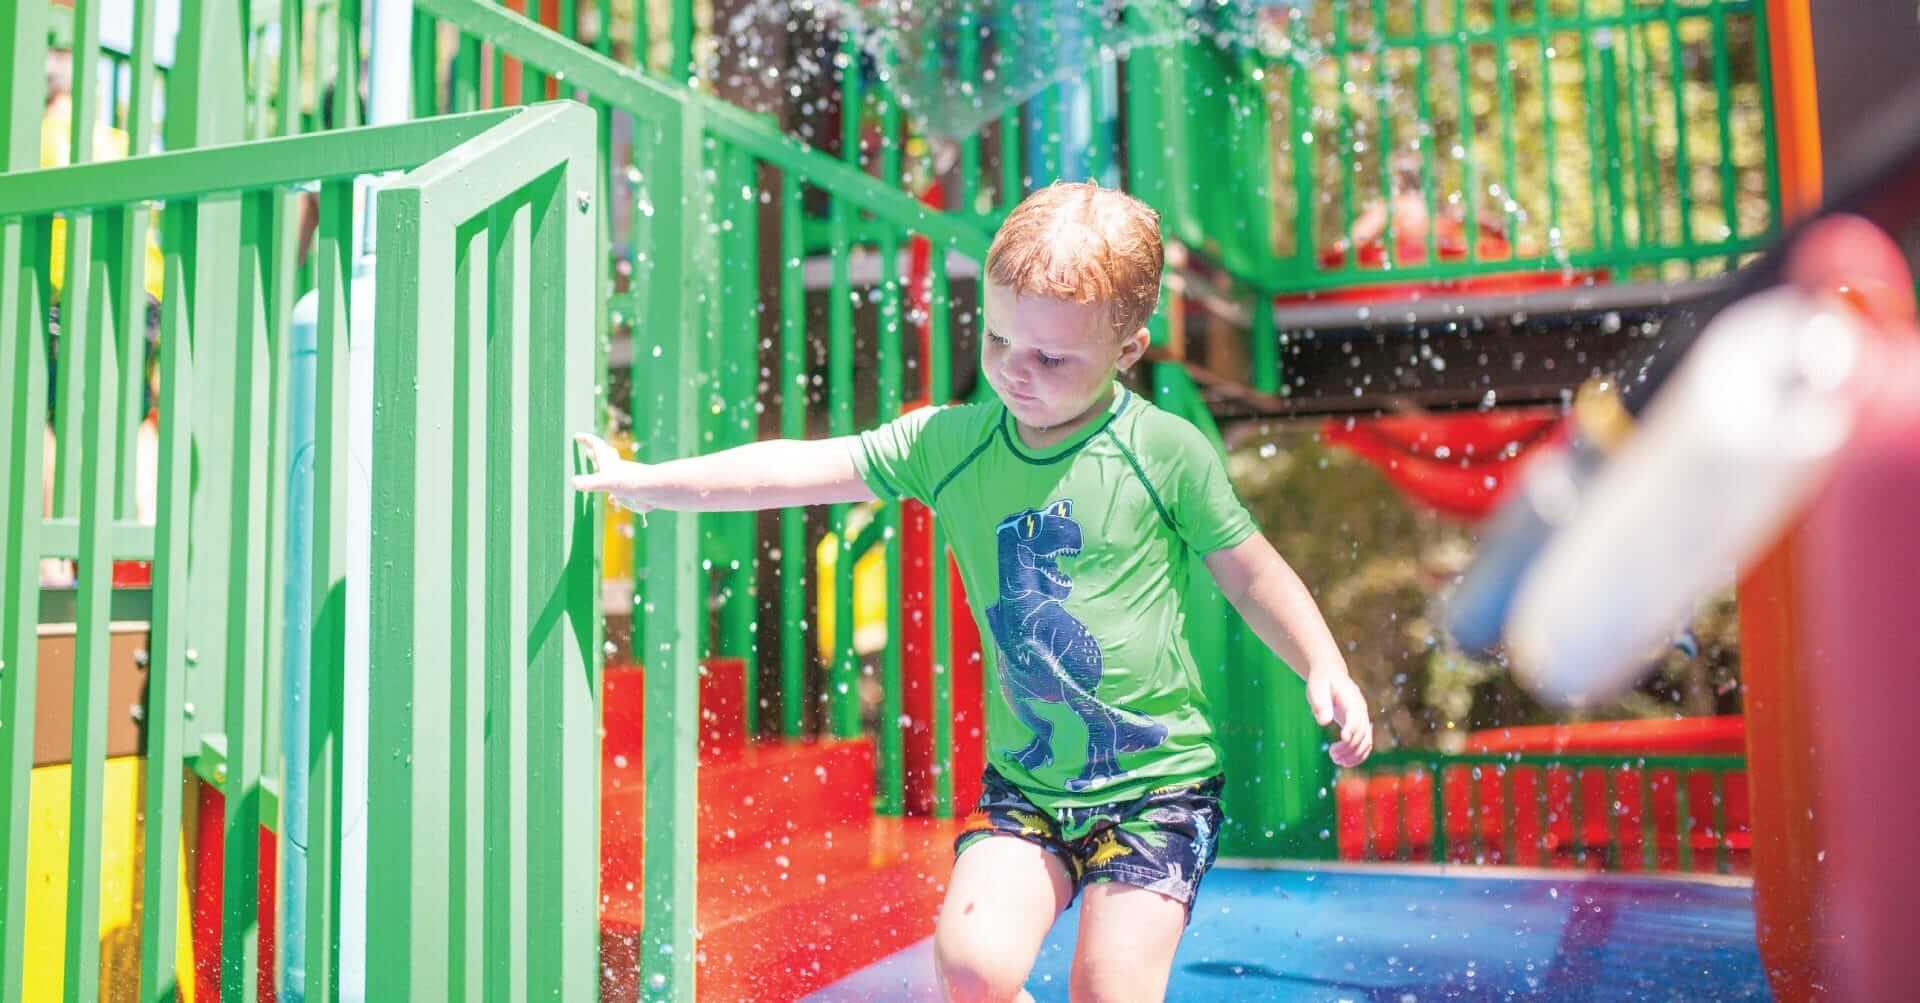 A little boy exits the water play structure by Interactive Play, water sprays in the background.